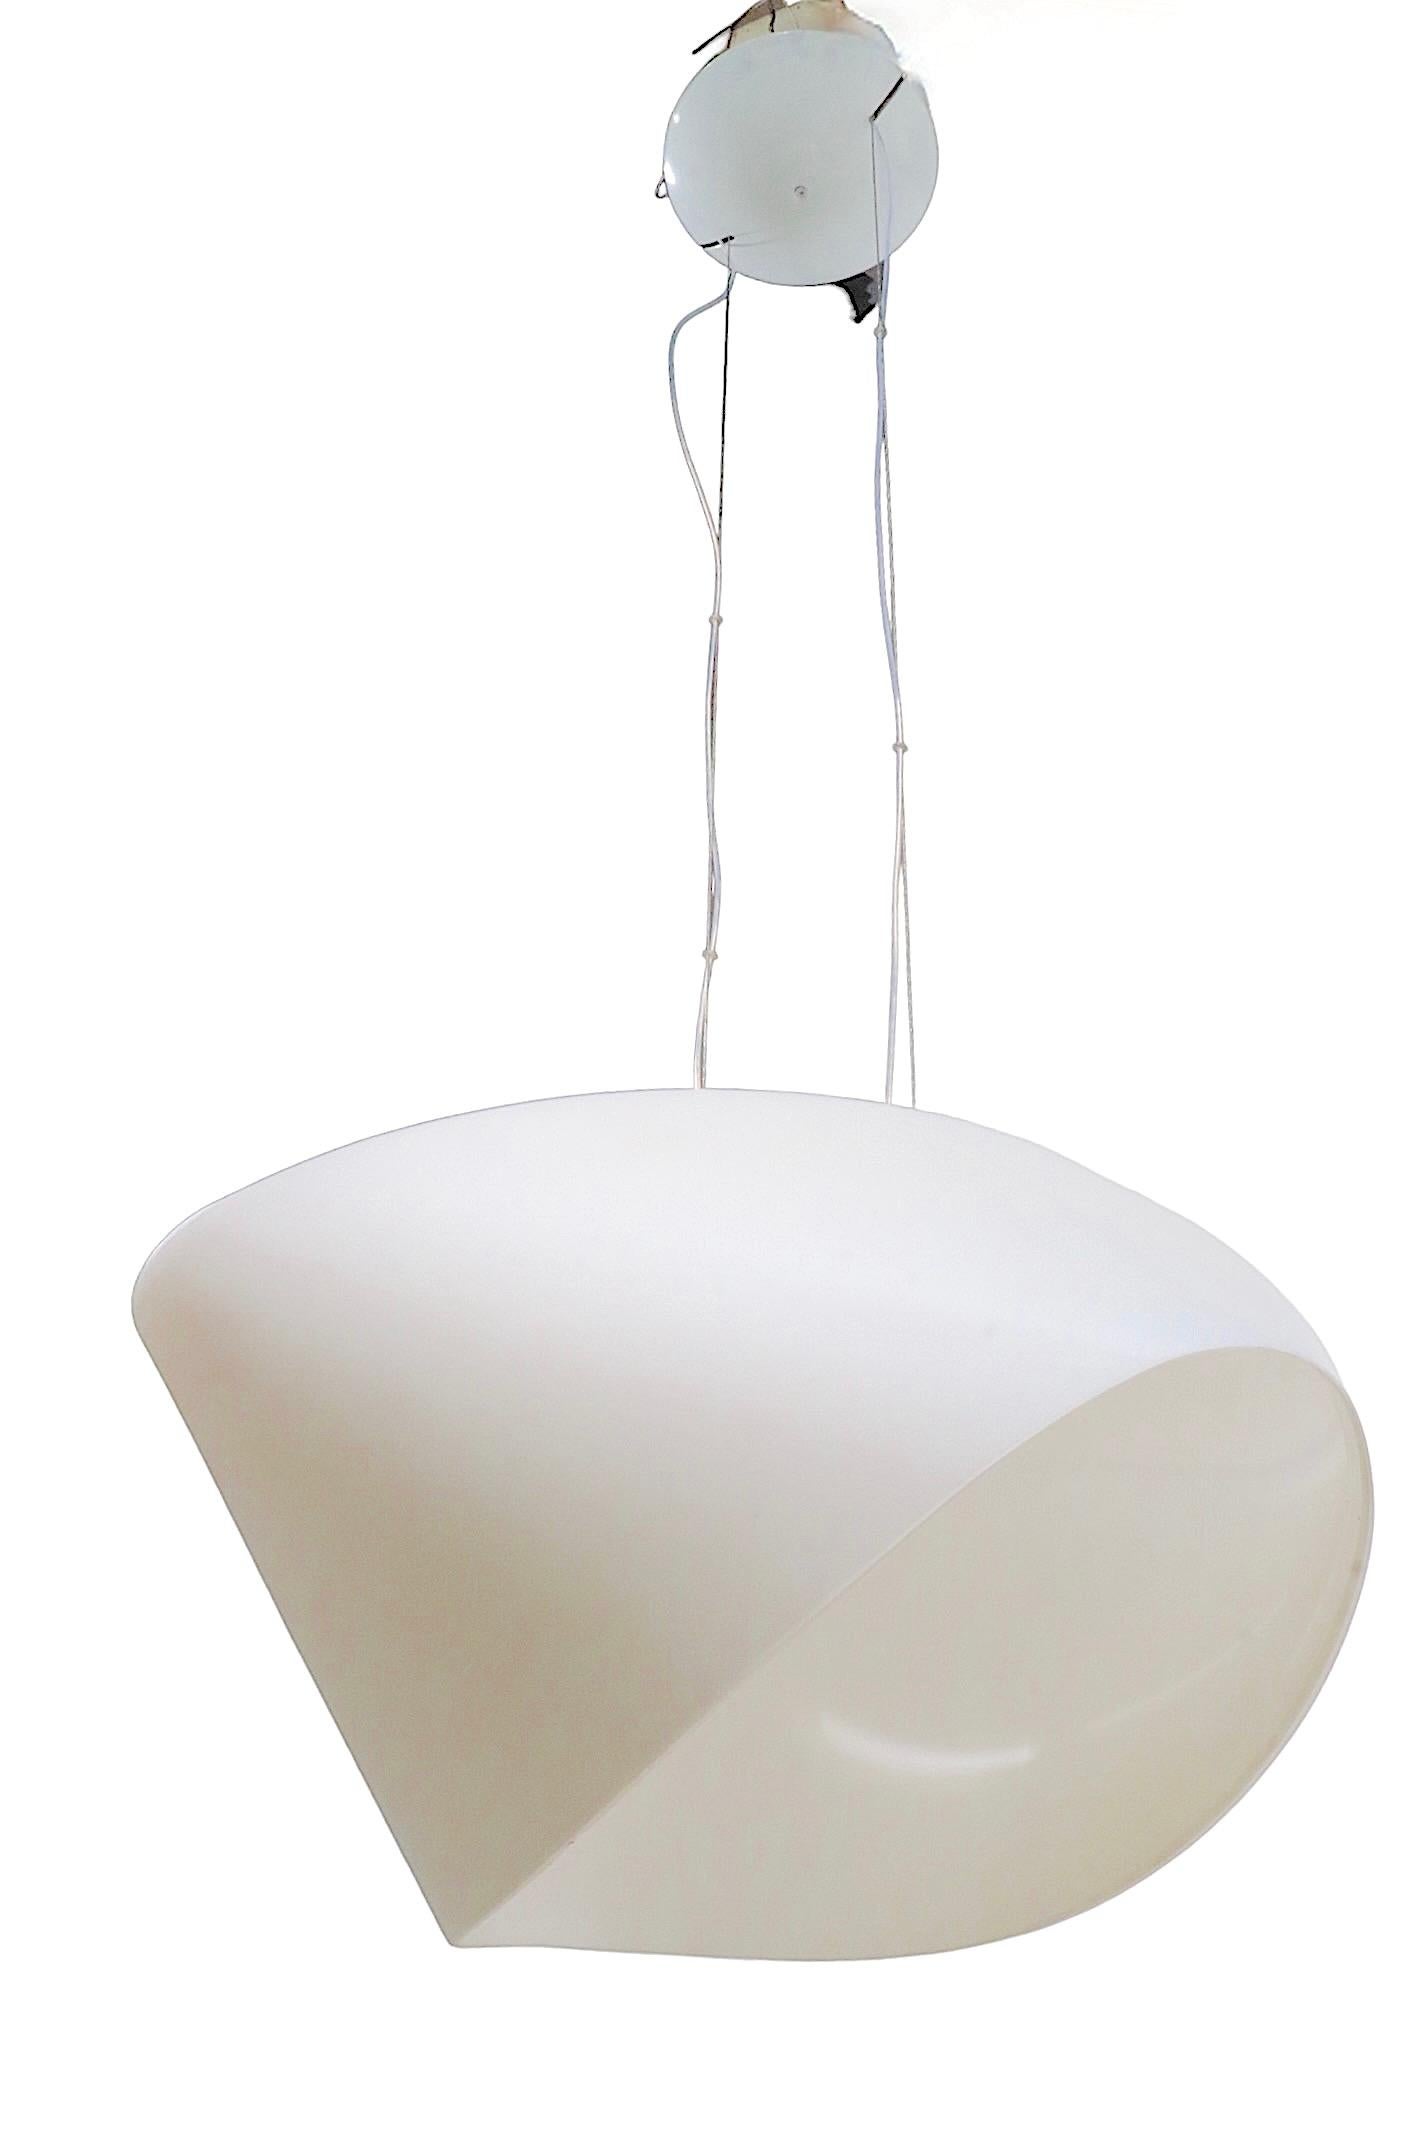 Asymmetrical Satin Glass Post Modern Light Fixture Made in Italy by Foscarini For Sale 7